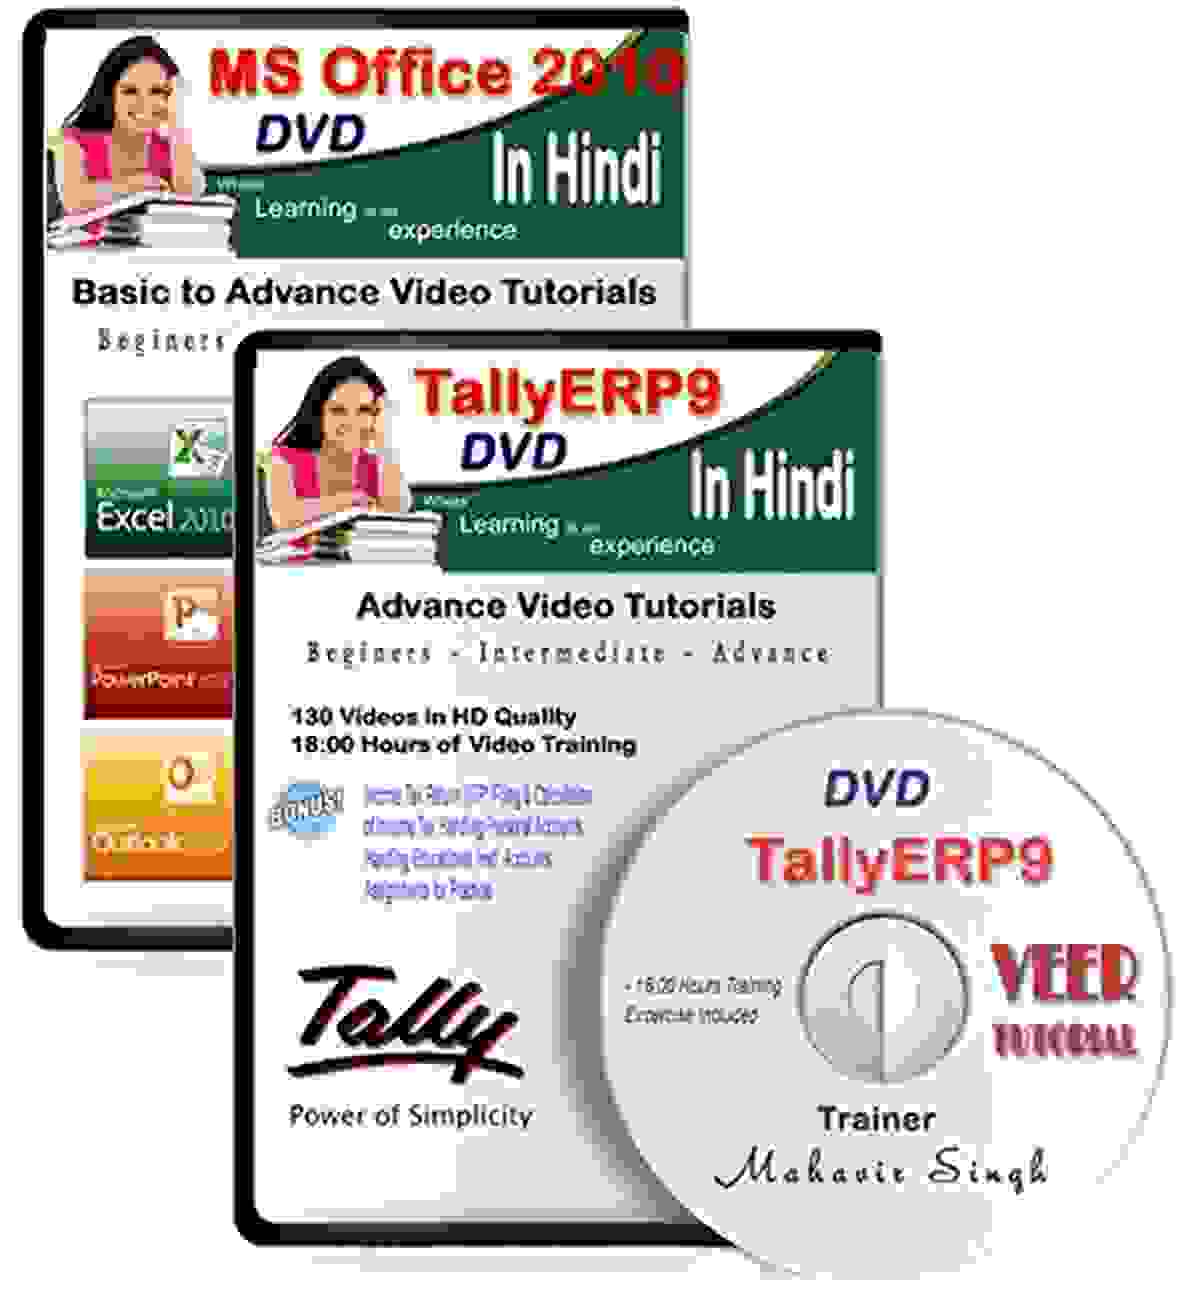 TallyERP9 Tutorial DVD Latest Version with GST + MS Office Latest Version (300 HD Video, 28 Hrs) 2 DVD in Hindi Video